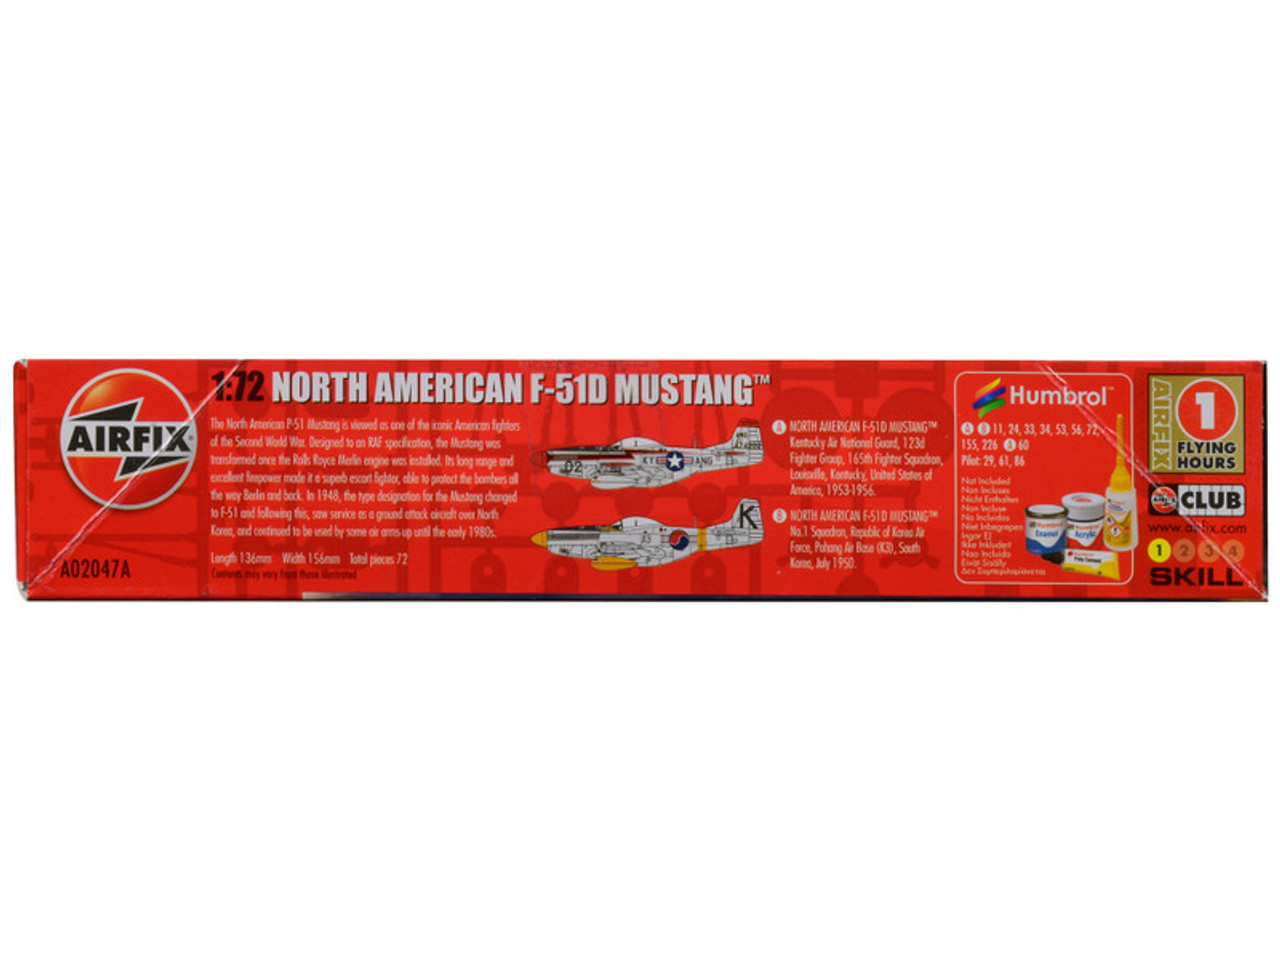 Skill 1 Model Kit North American P-51D Mustang Fighter Aircraft with 2 Scheme Options 1/72 Plastic Model Kit by Airfix